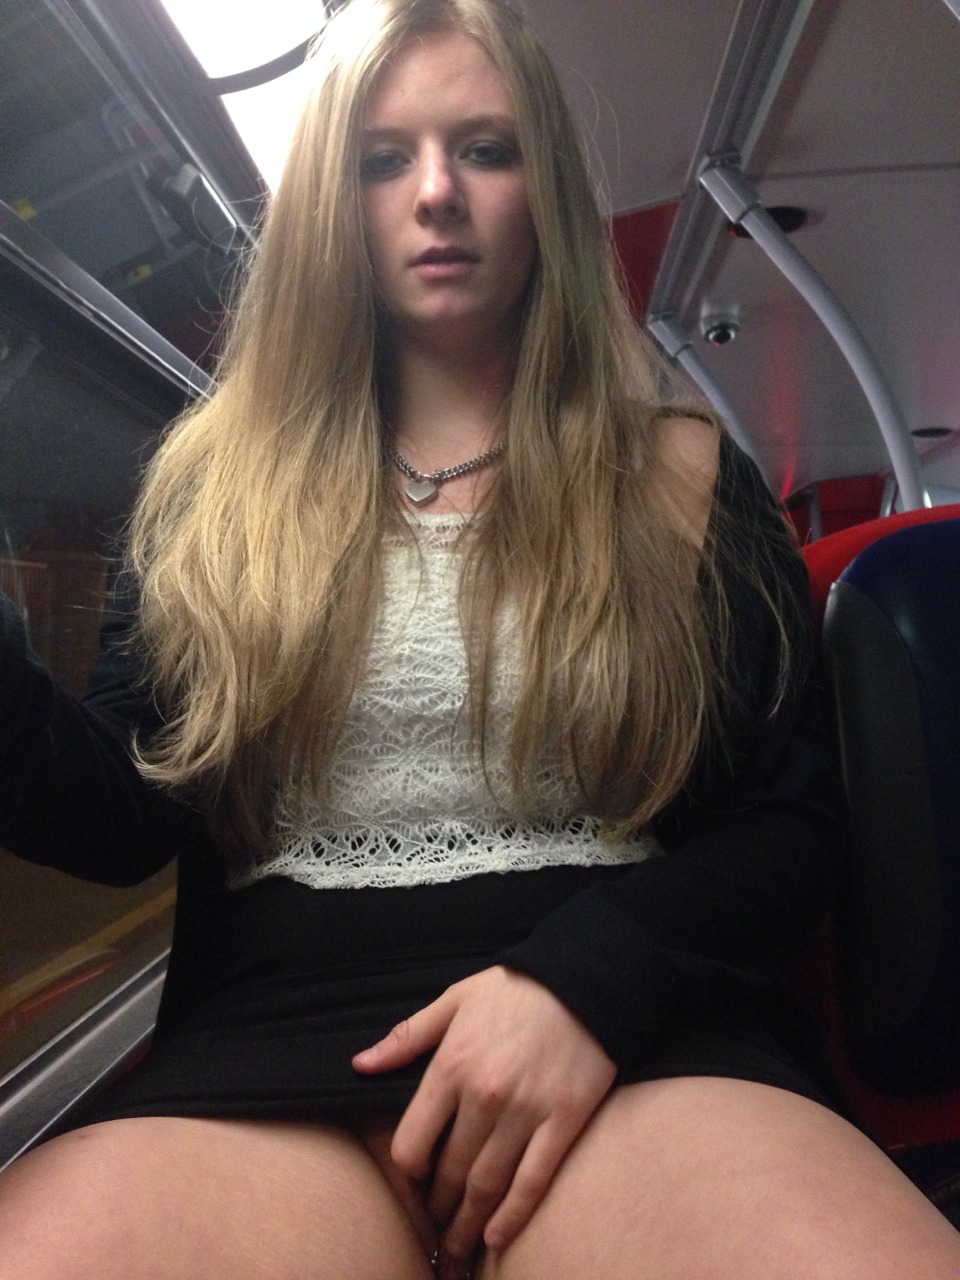 lilperv16:  Night out part 1  Lil perv flashing everywhere outside and the subway